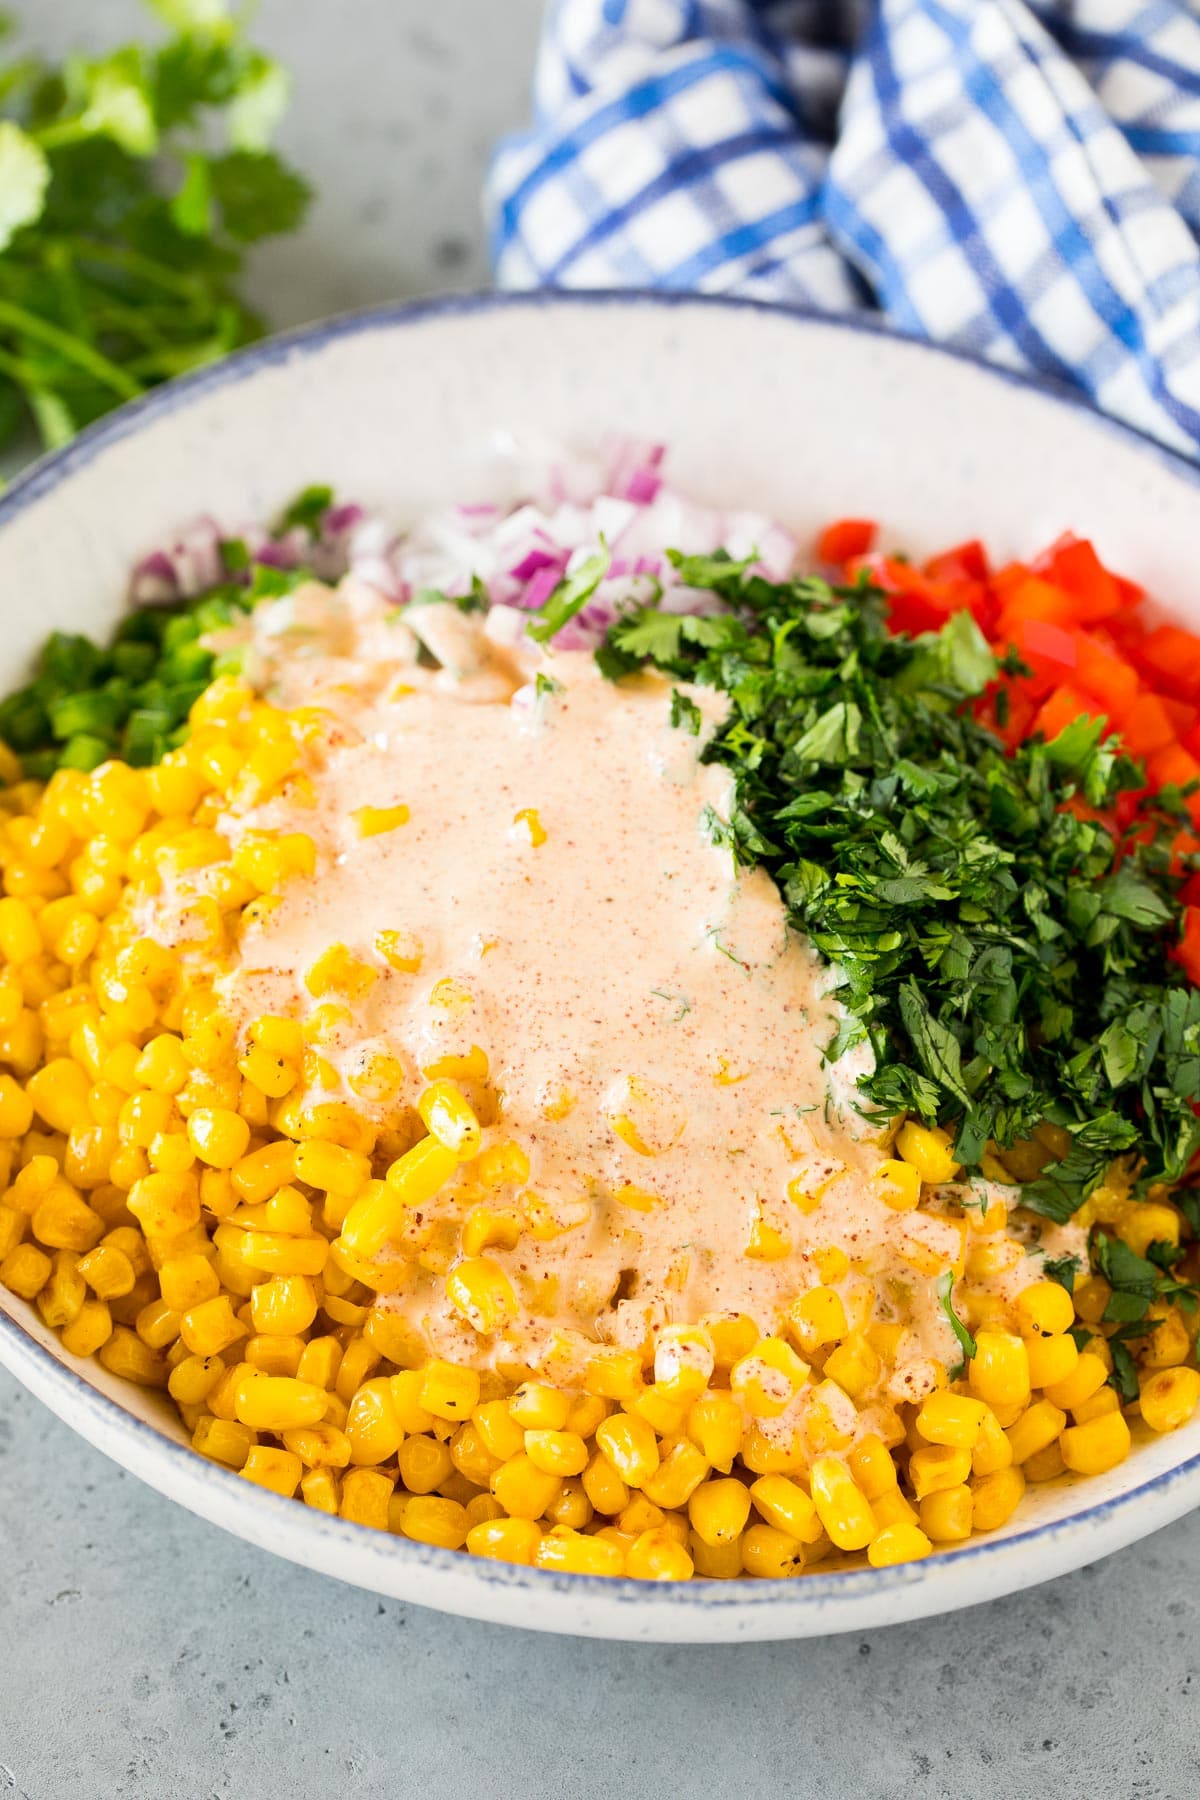 Dressing poured over a bowl of corn and vegetables.